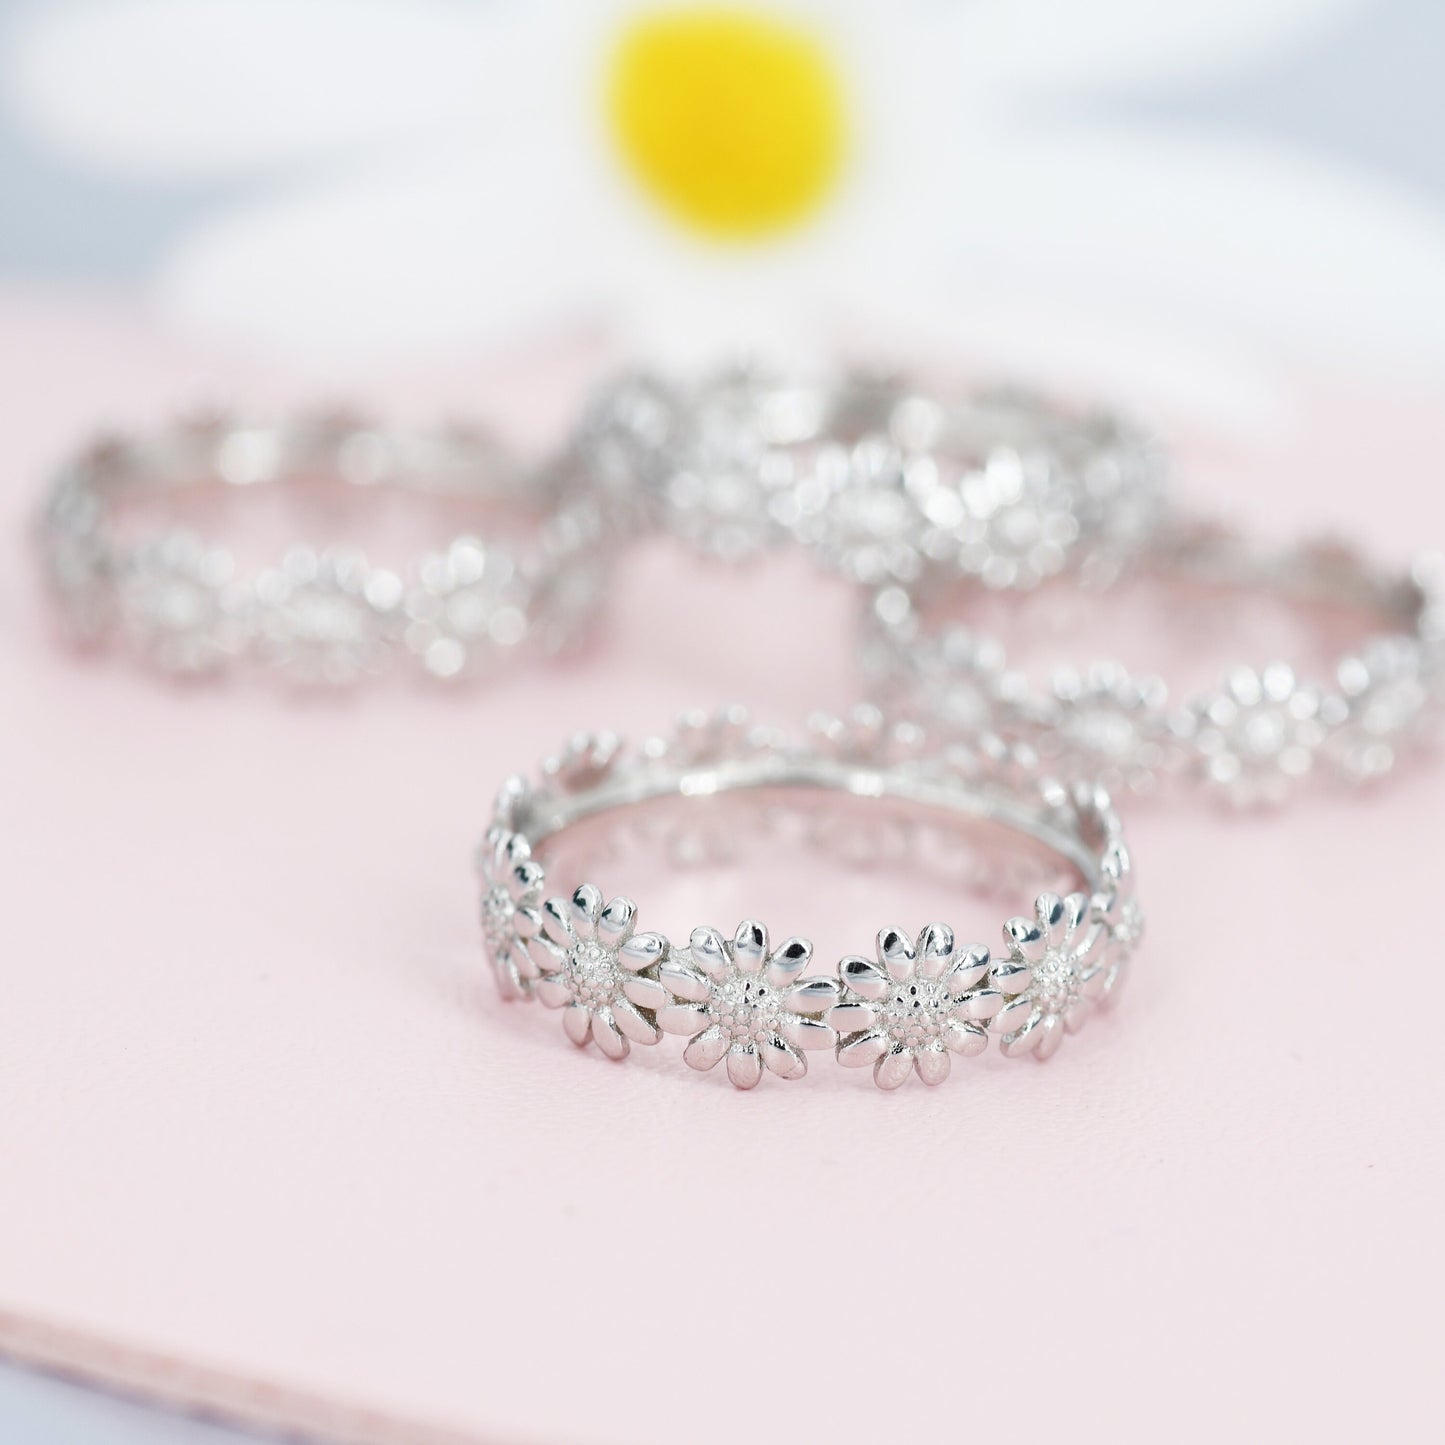 Sterling Silver Daisy Flower Ring, Flower Infinity Band, Eternity Ring, Friendship Ring,  Nature Inspired Jewellery US 5 - 8